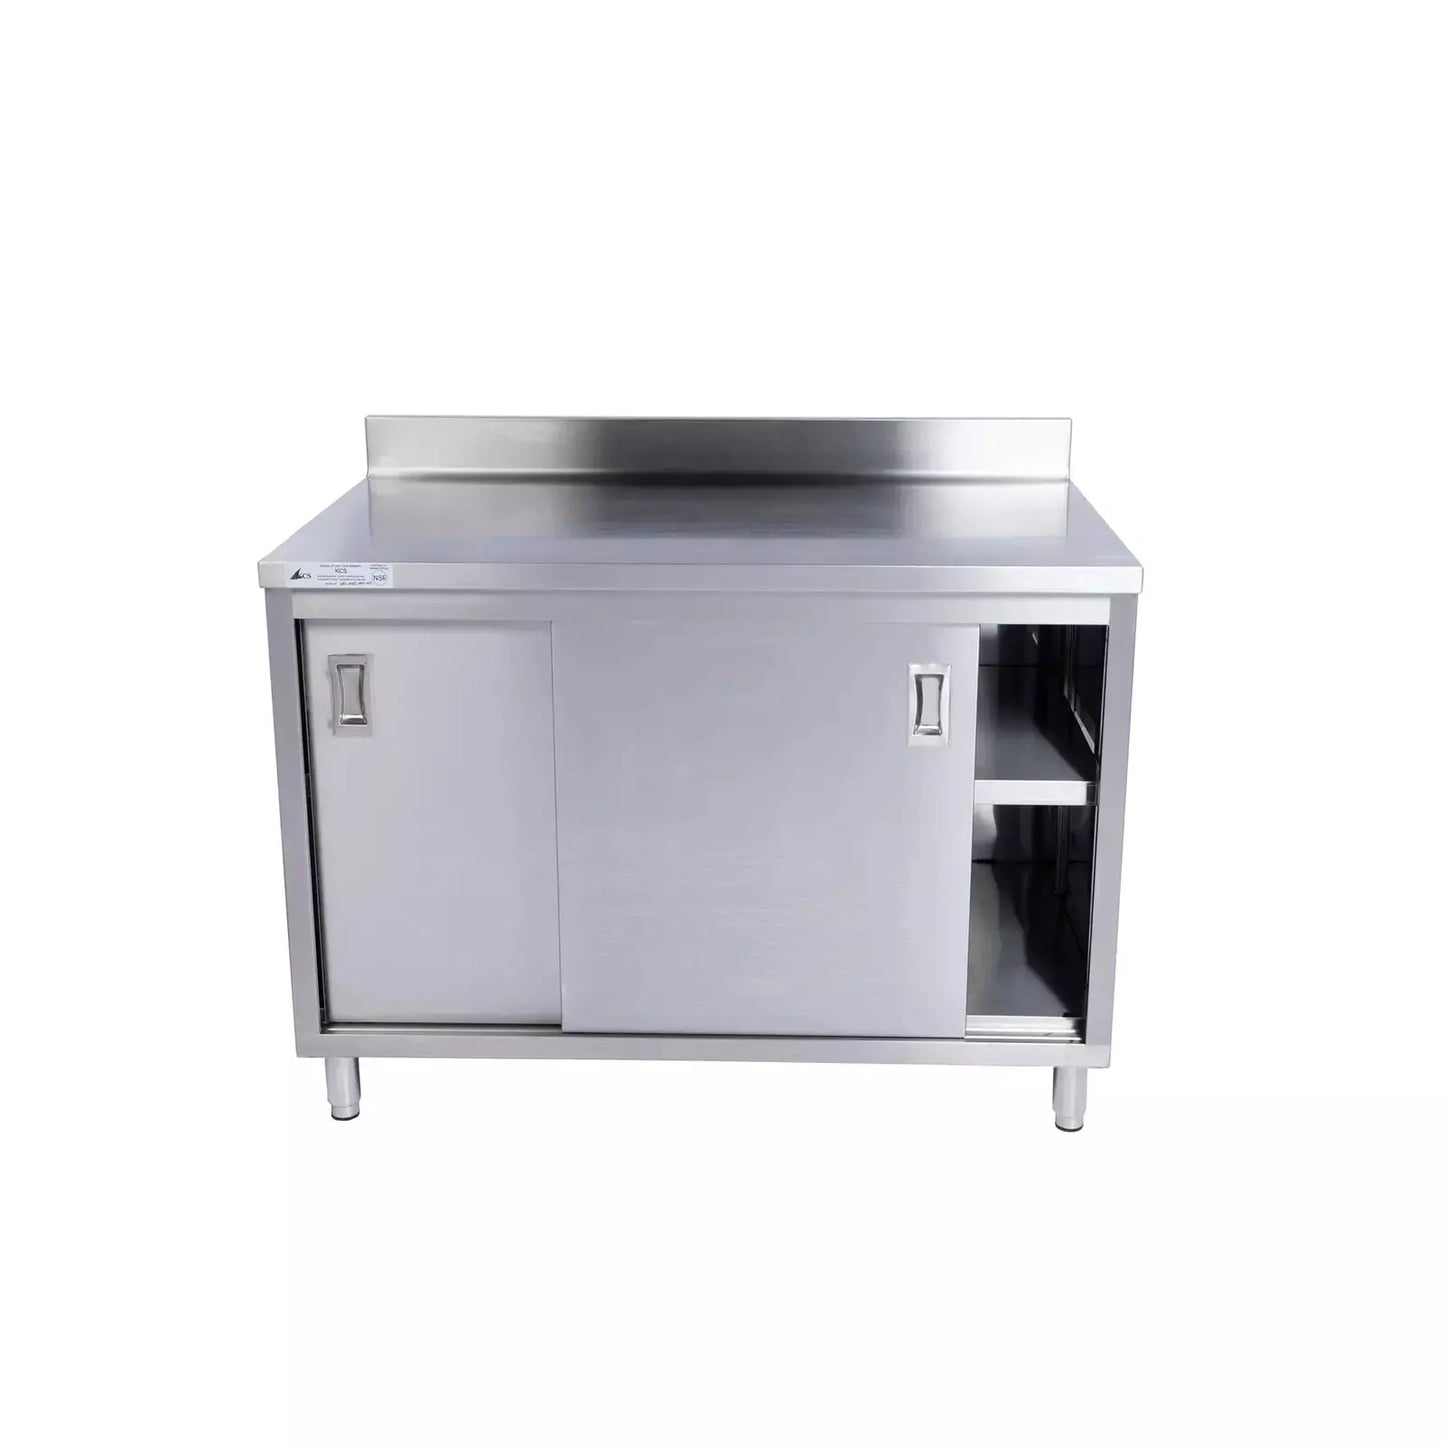 KCS CBS-3060-4BS 30" x 60" Stainless Steel Storage Welded Cabinet with With 2 Sliding Doors and 4" Backsplash